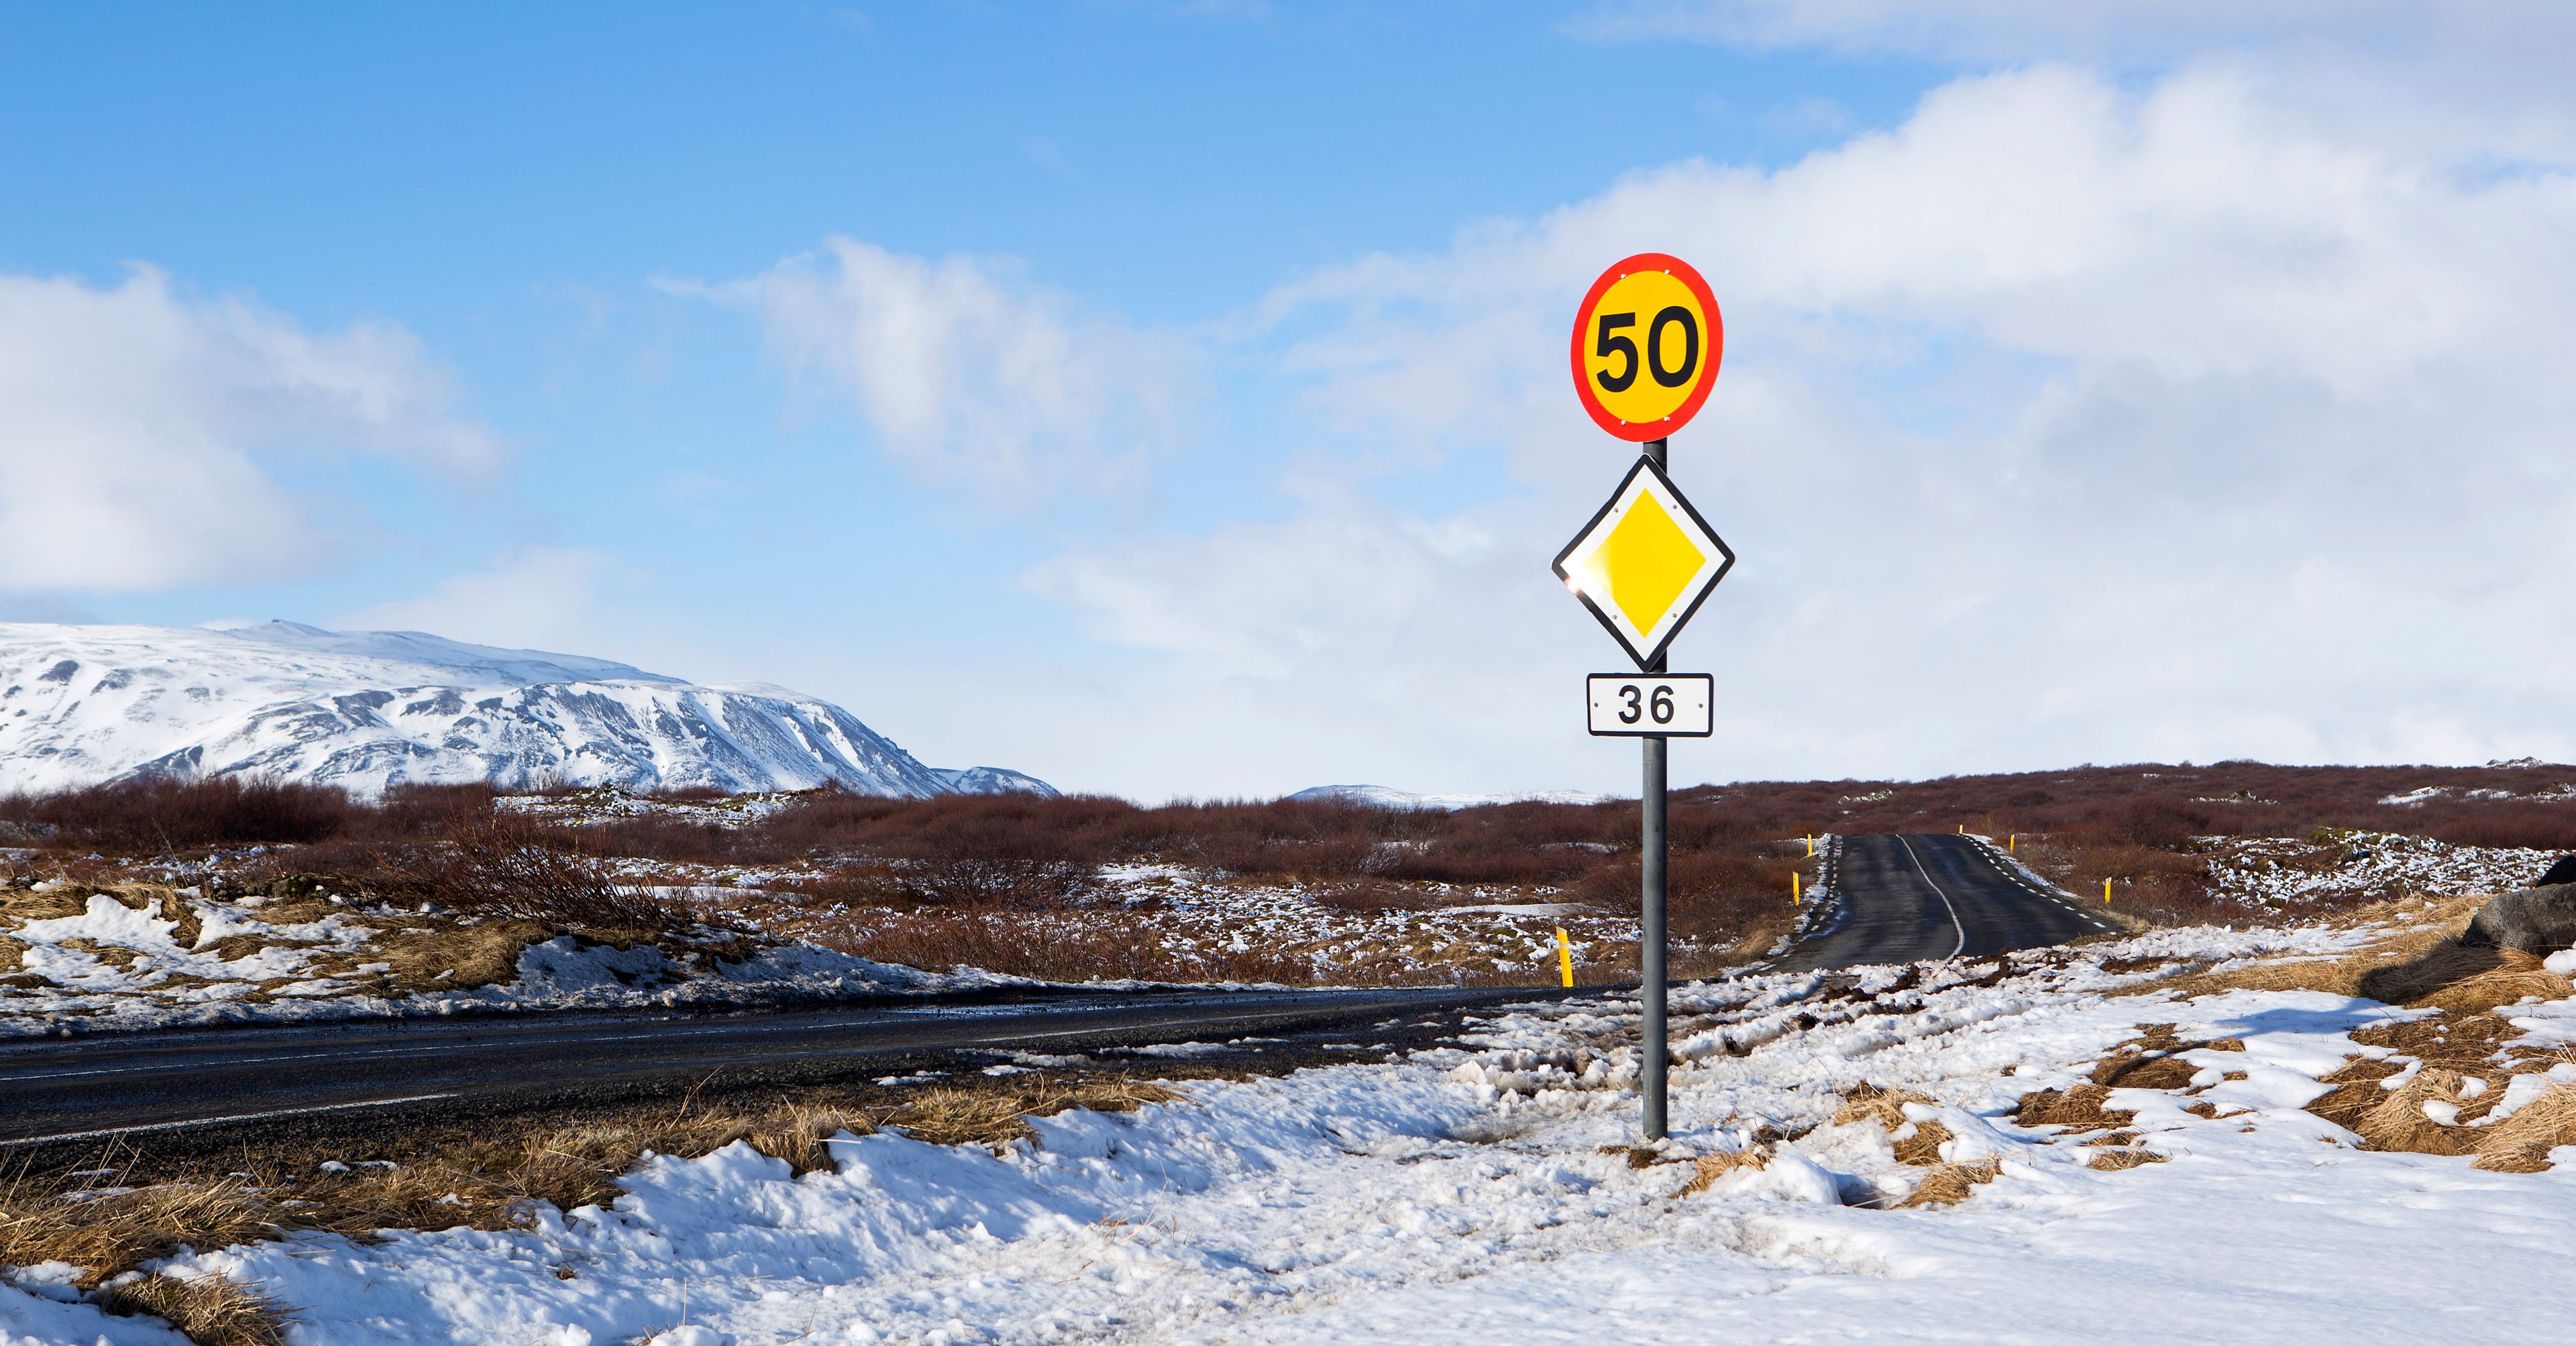 Speed limit sign in Iceland that says 50 is the maximum speed limit